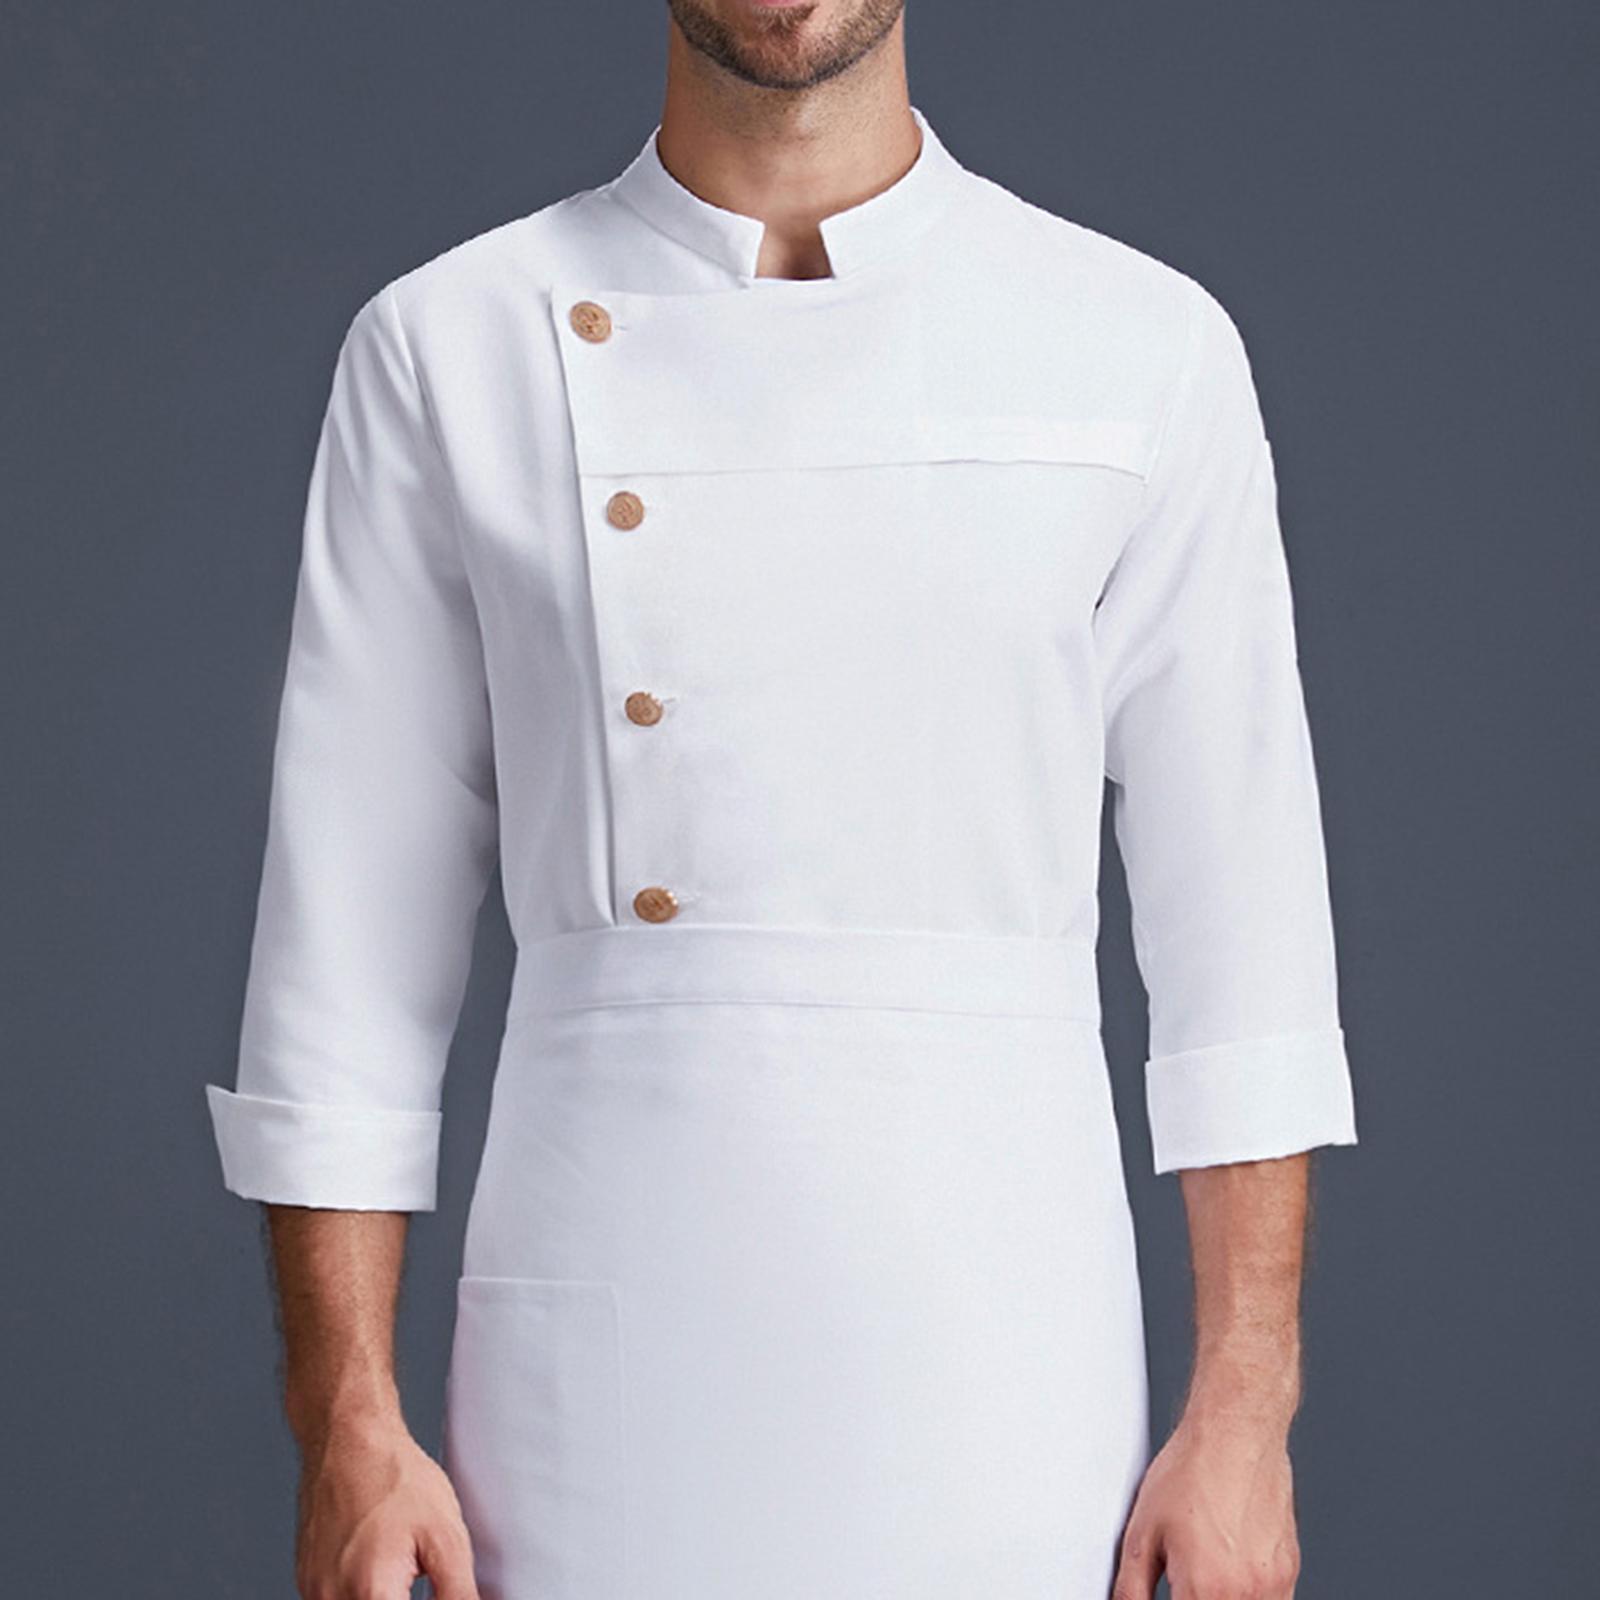 Chef Coat Jacket Uniform Catering Chef Clothing Workwear for Industry